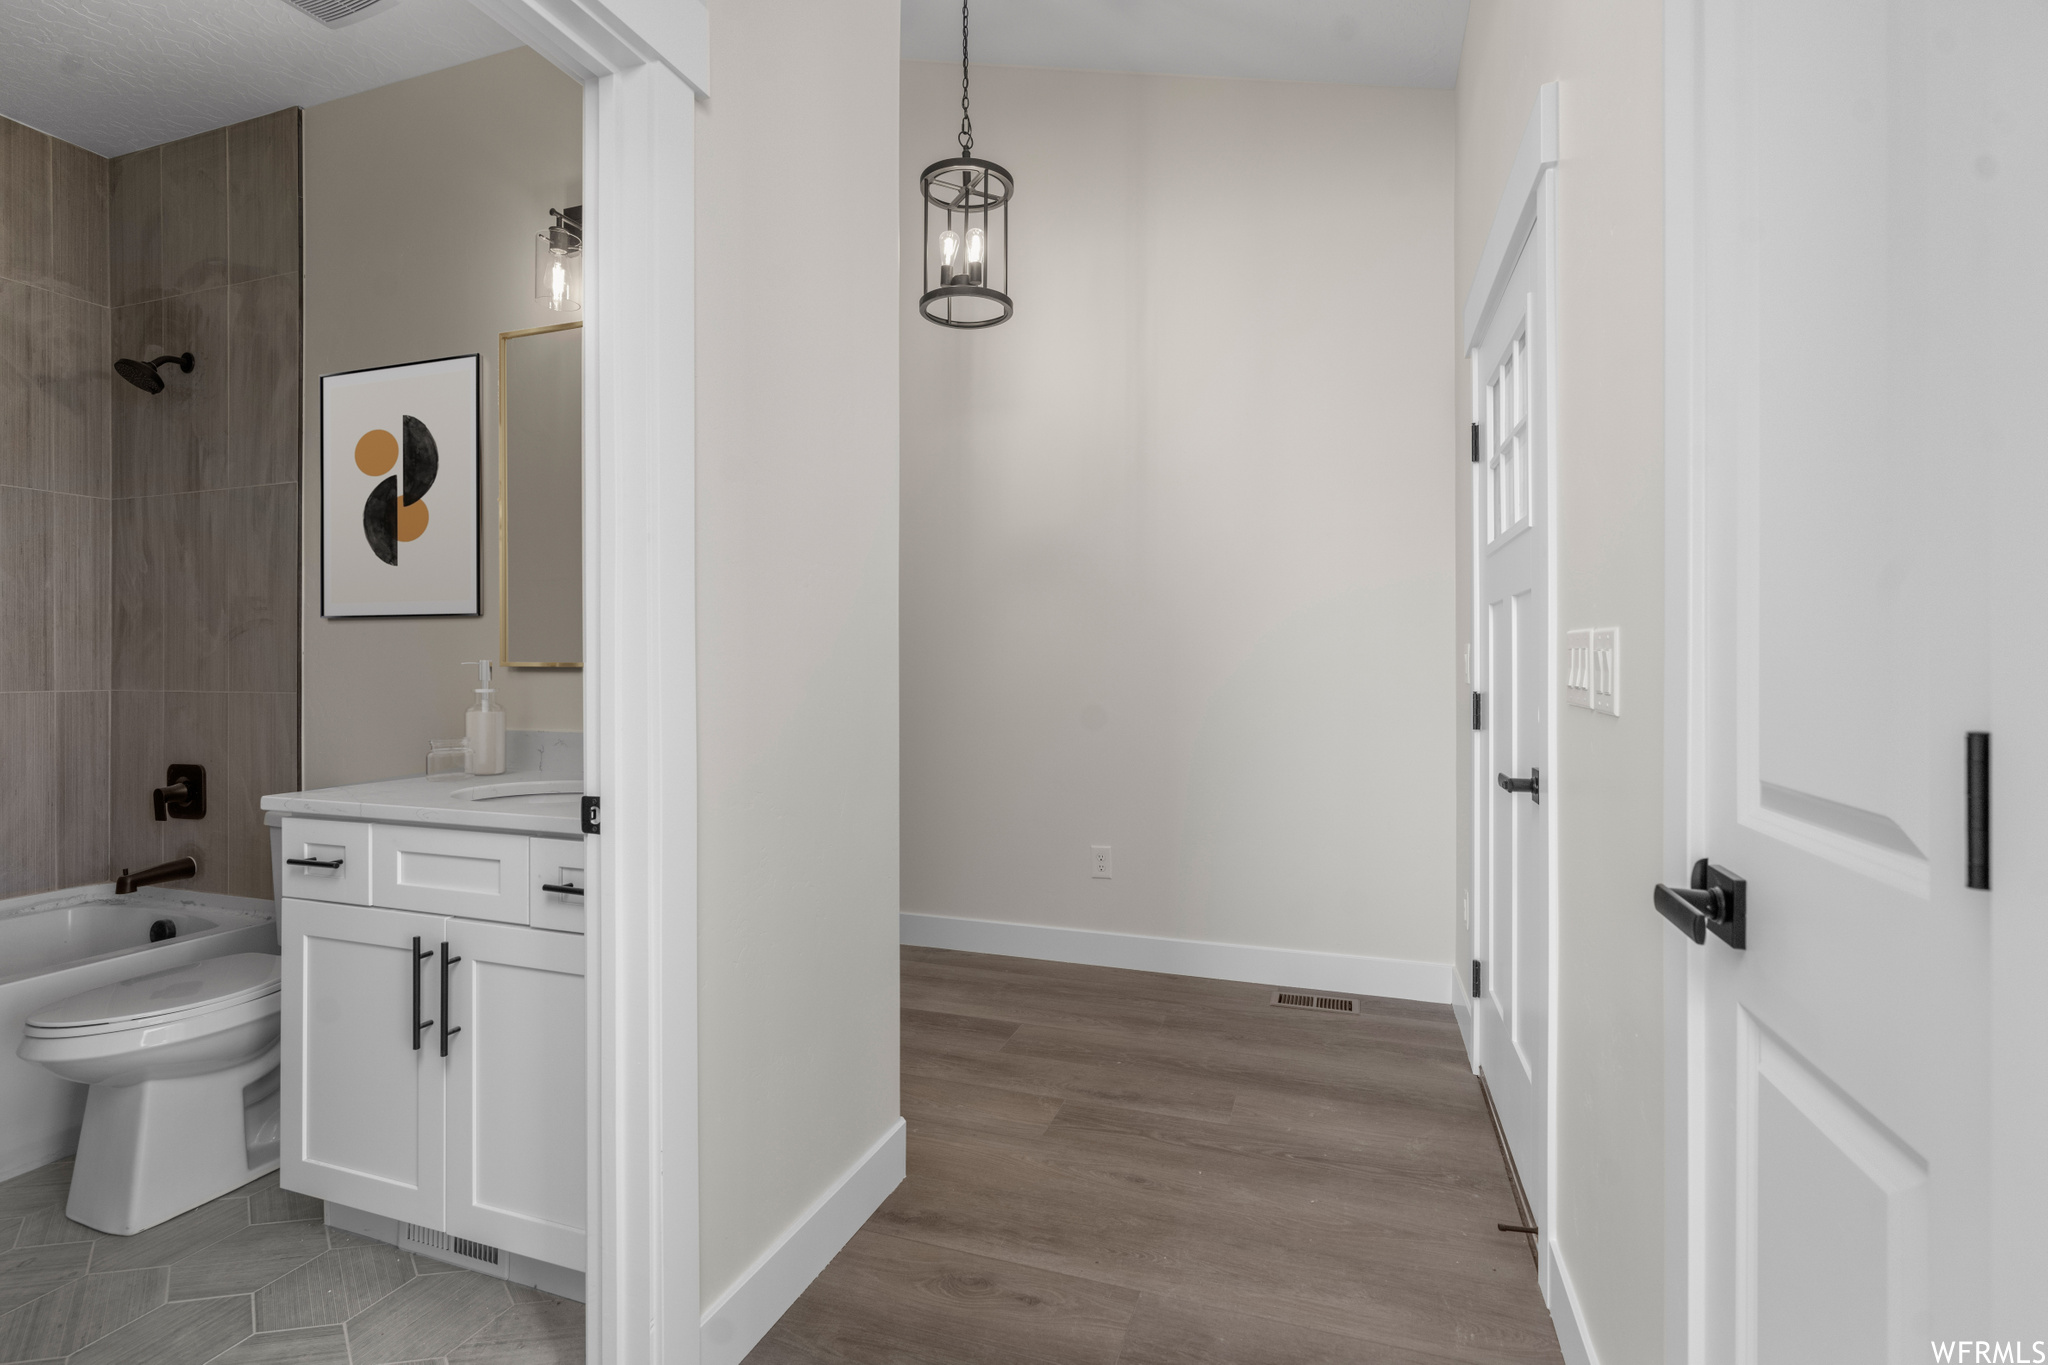 Virtual Staging